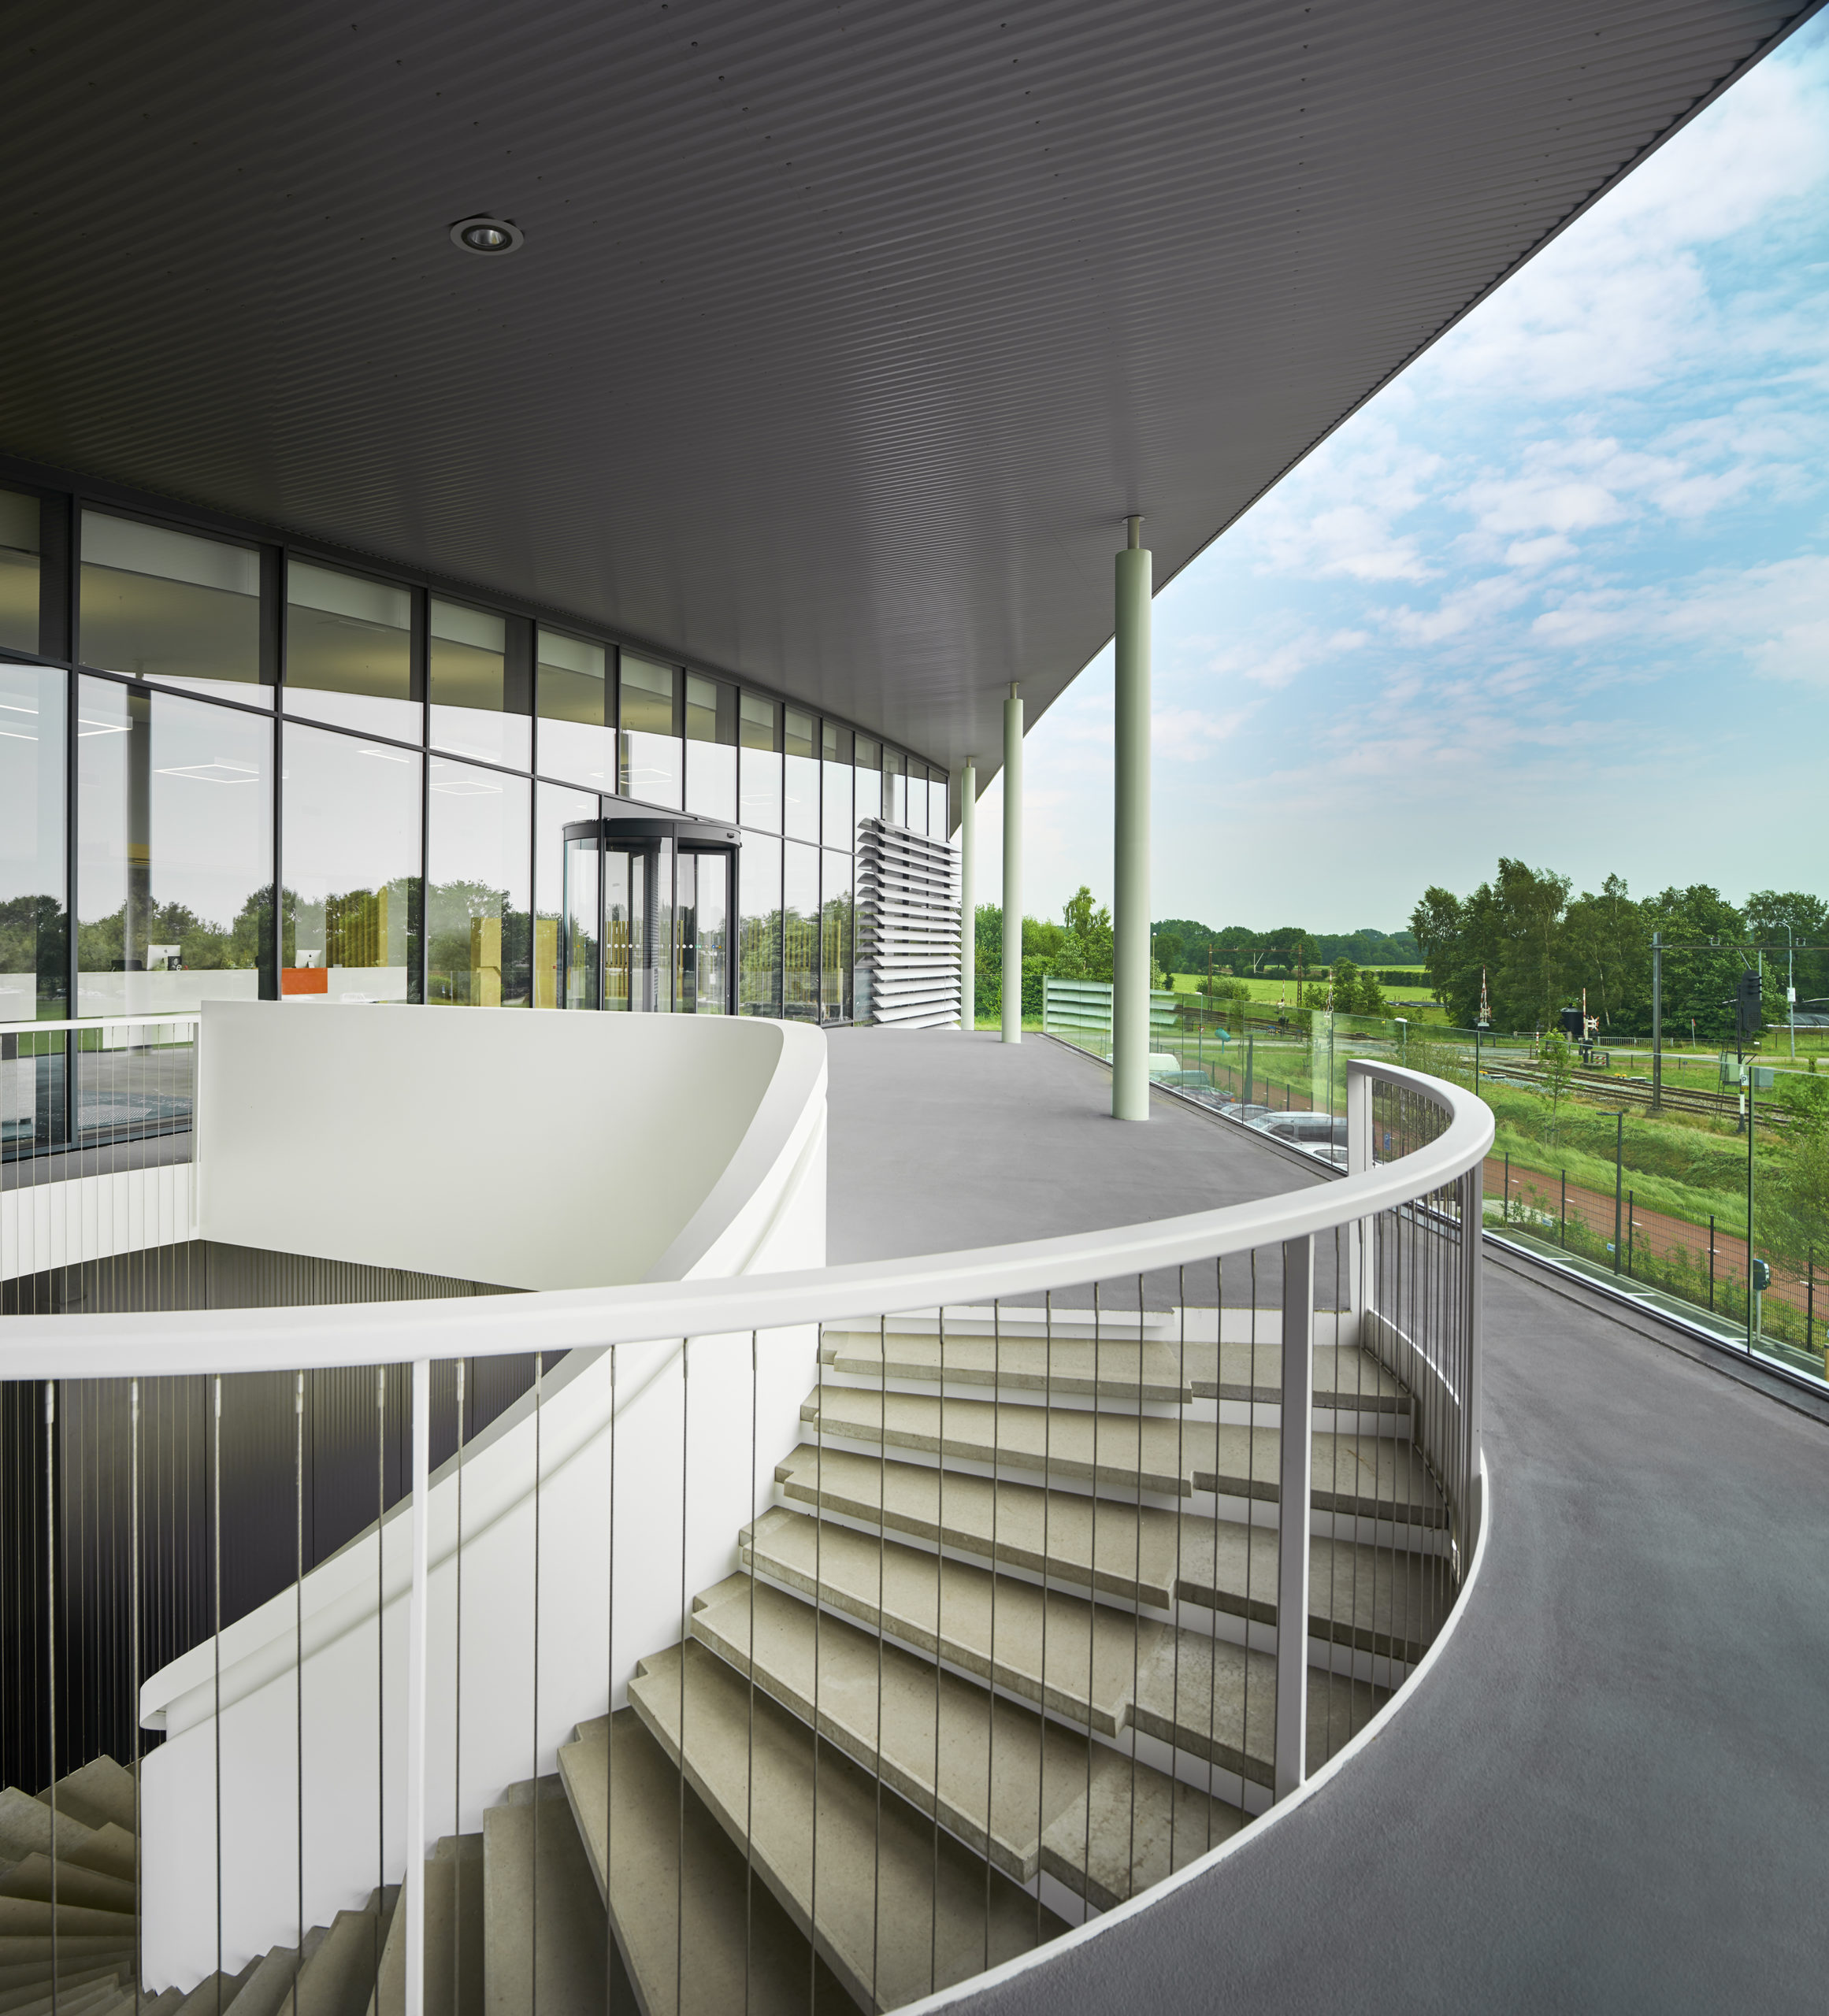 Eestairs_Barneveld_balustrade-with-vertical-tension-cables_Carl-Stahl-photo-Hans-Morren